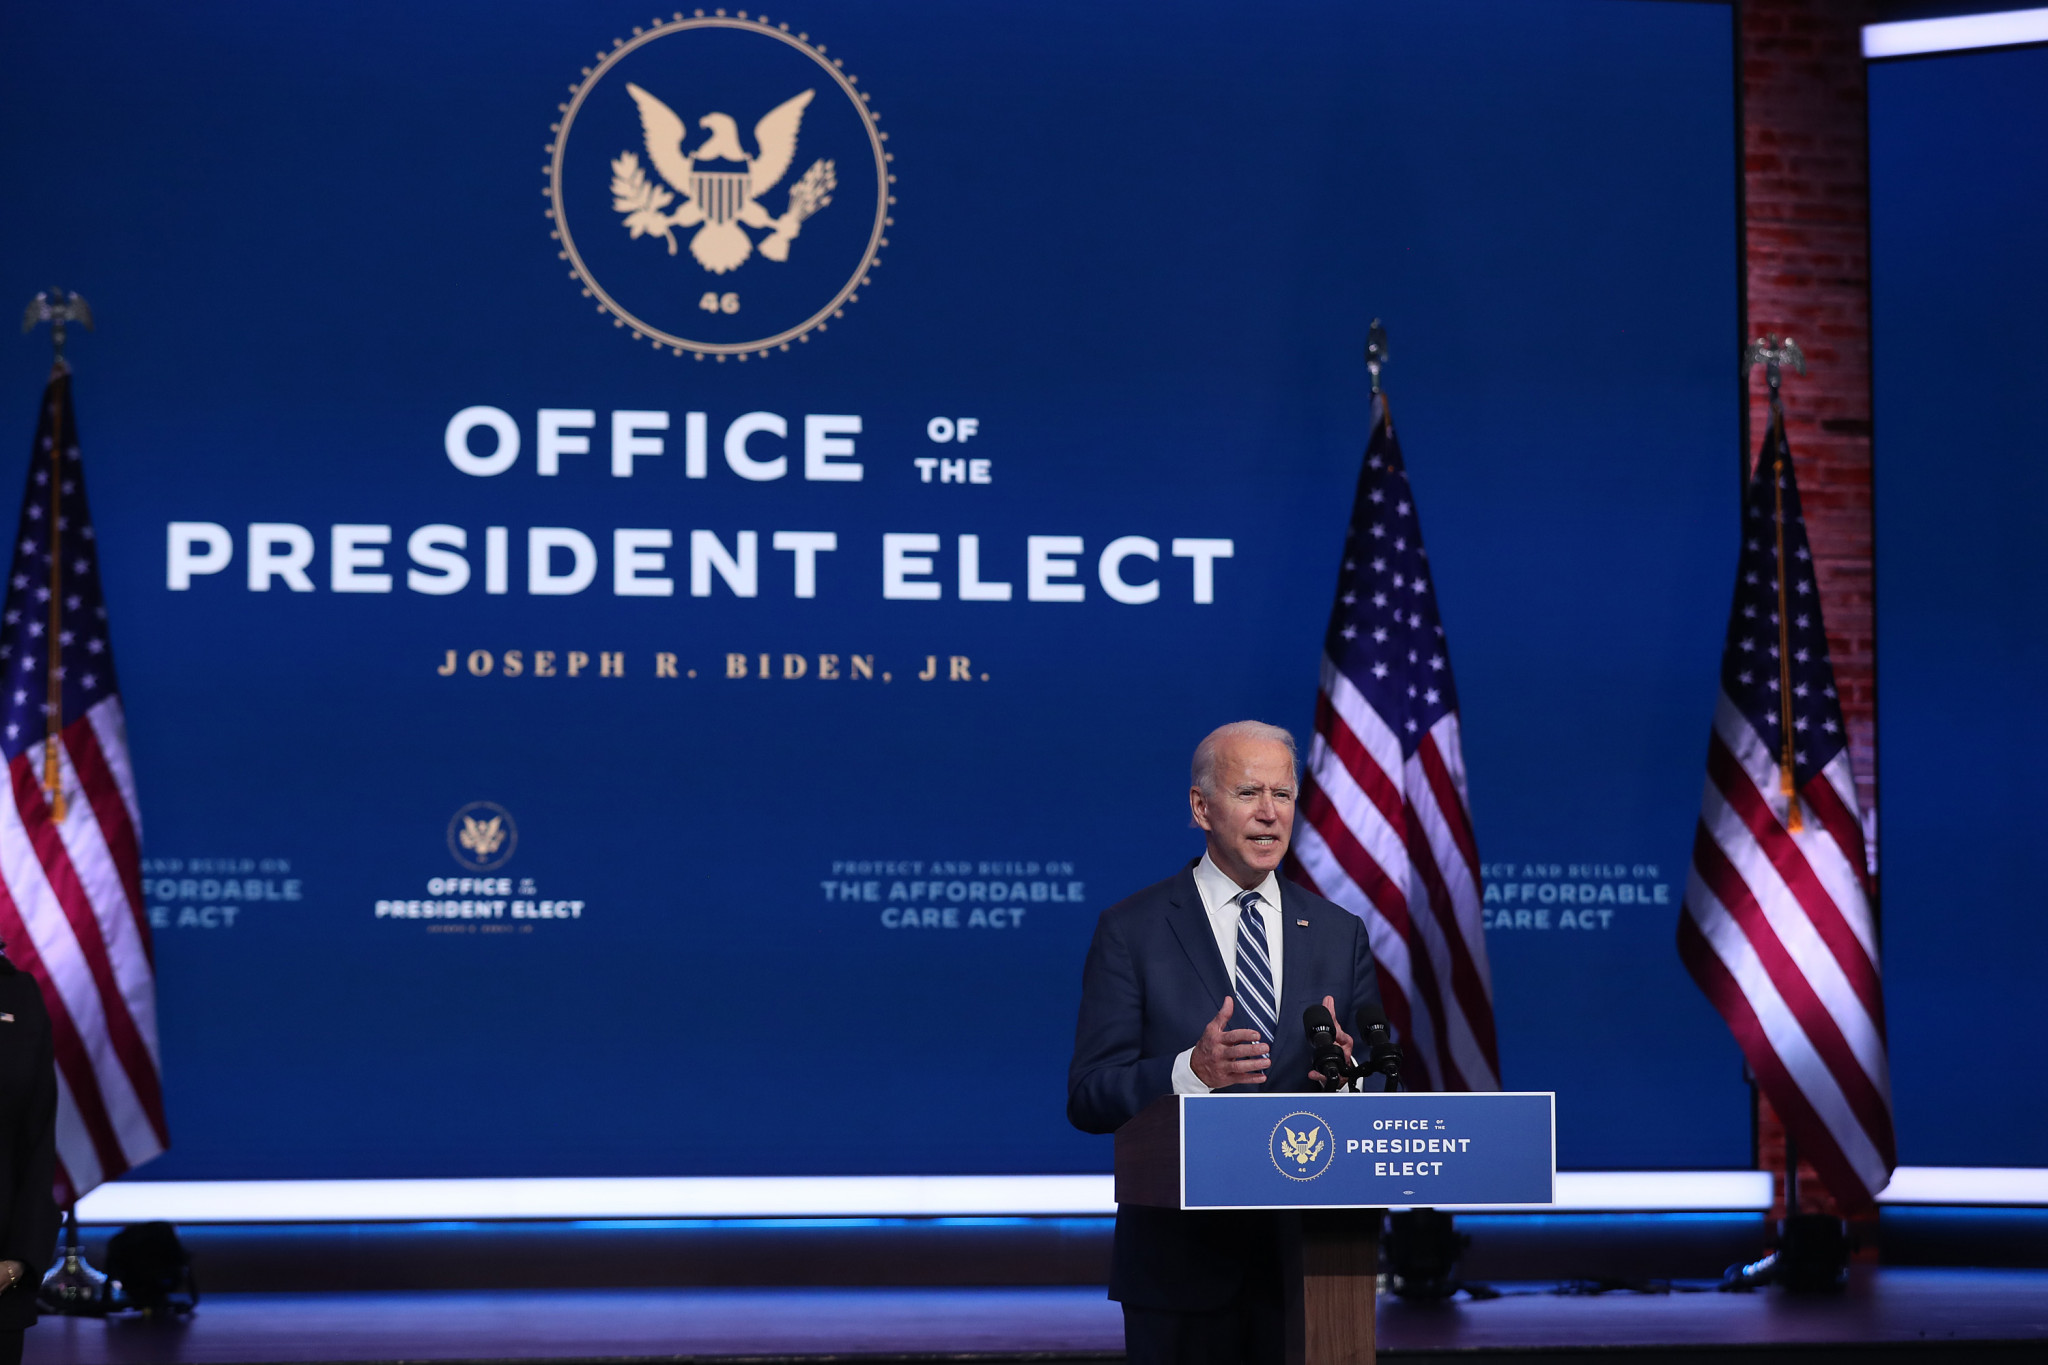 The International Olympic Committee may be breathing a sigh of relief at the news that Joe Biden is the new President elect of the United States ©Getty Images